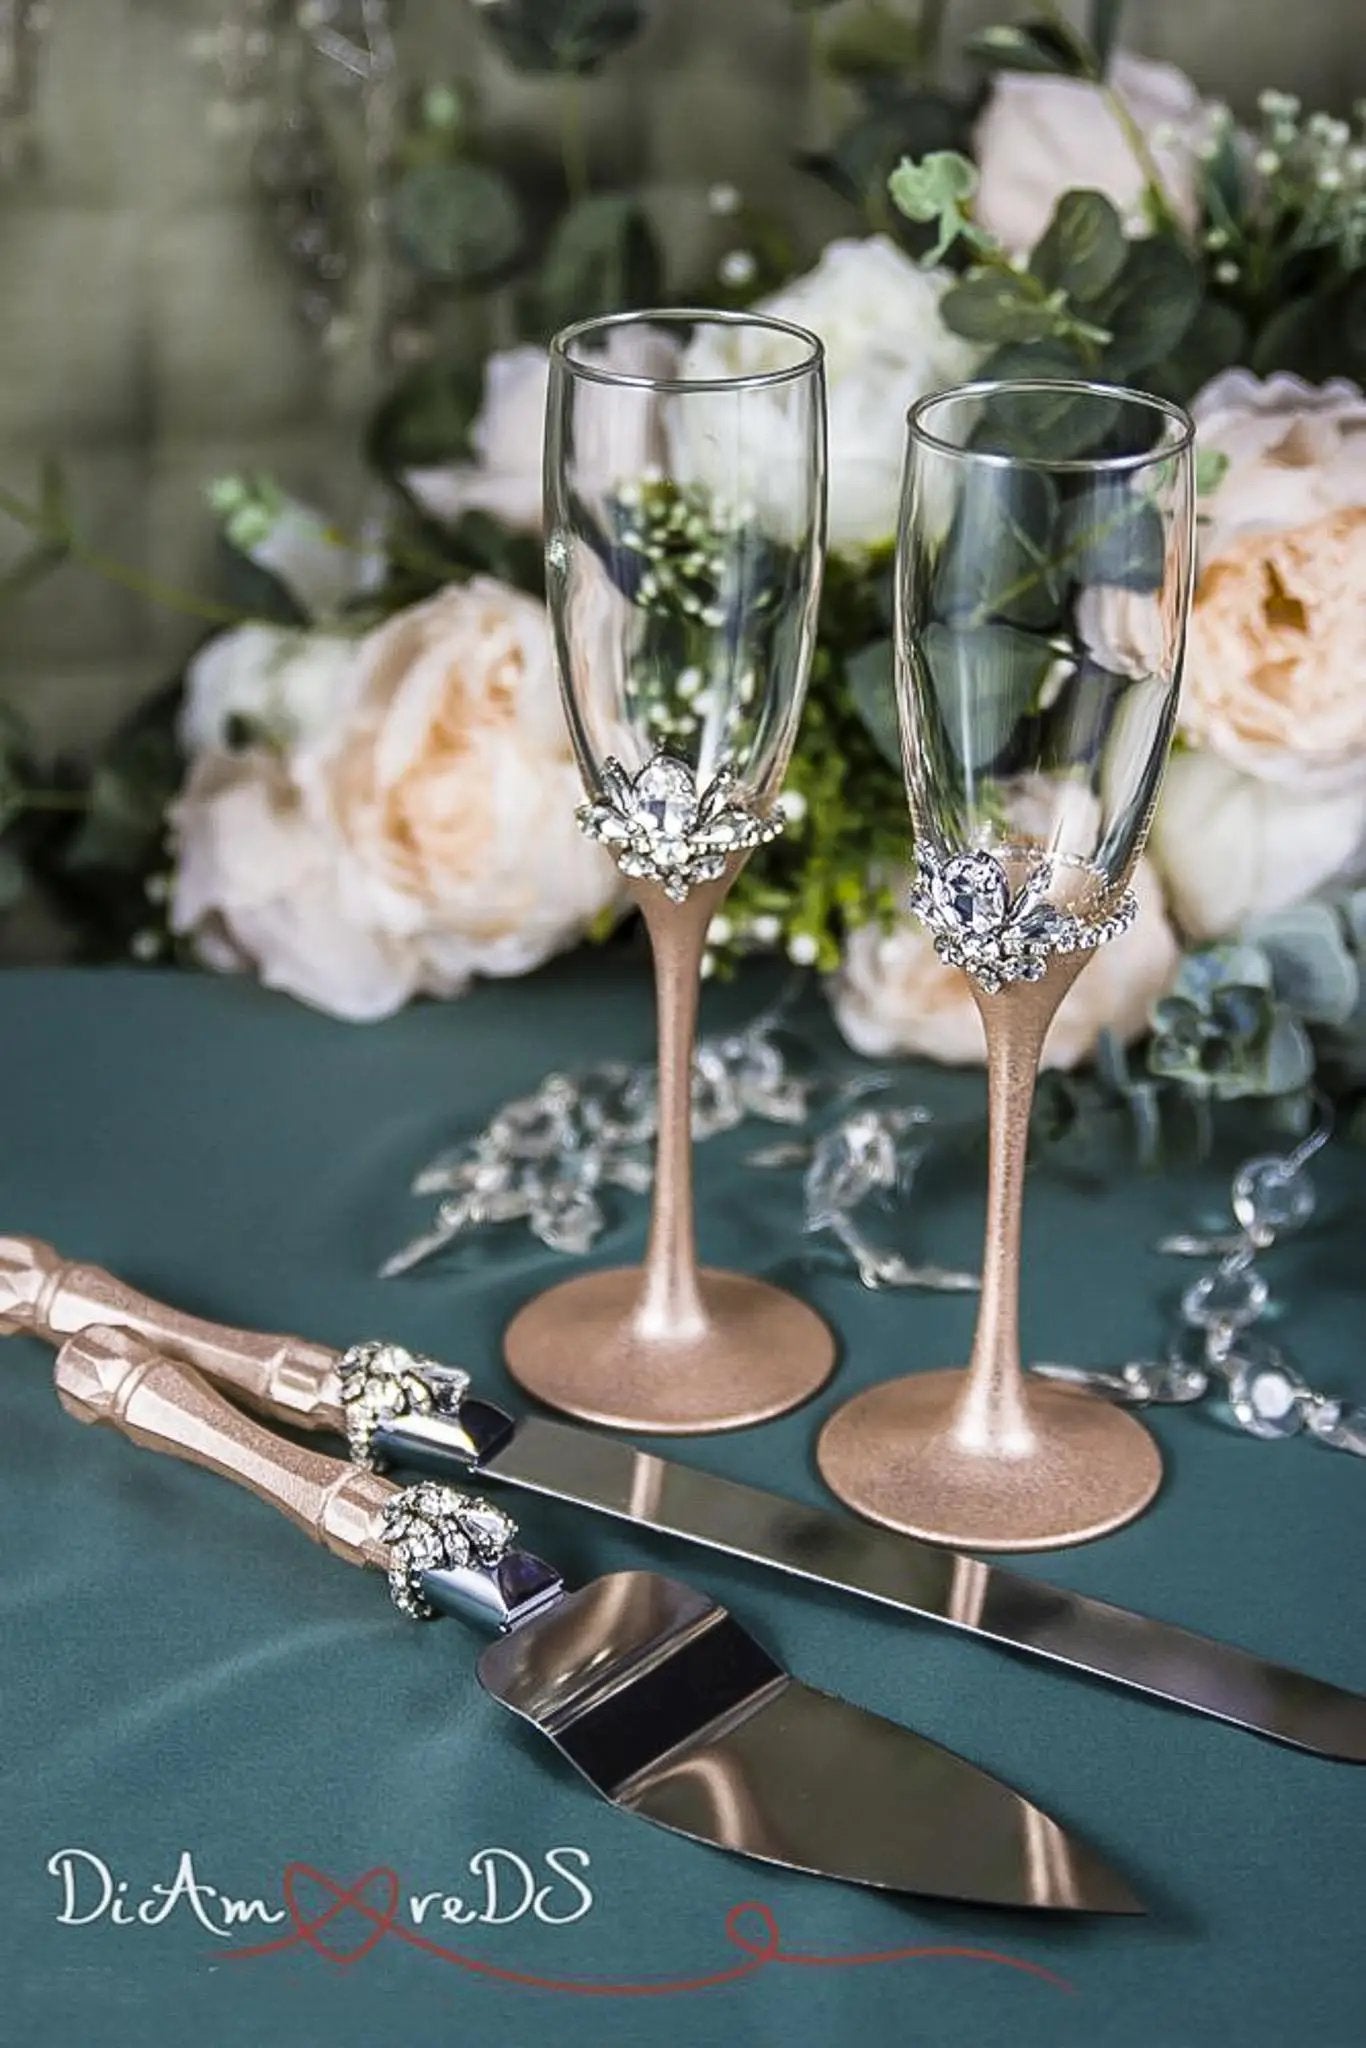 Handcrafted rose gold wedding accessories